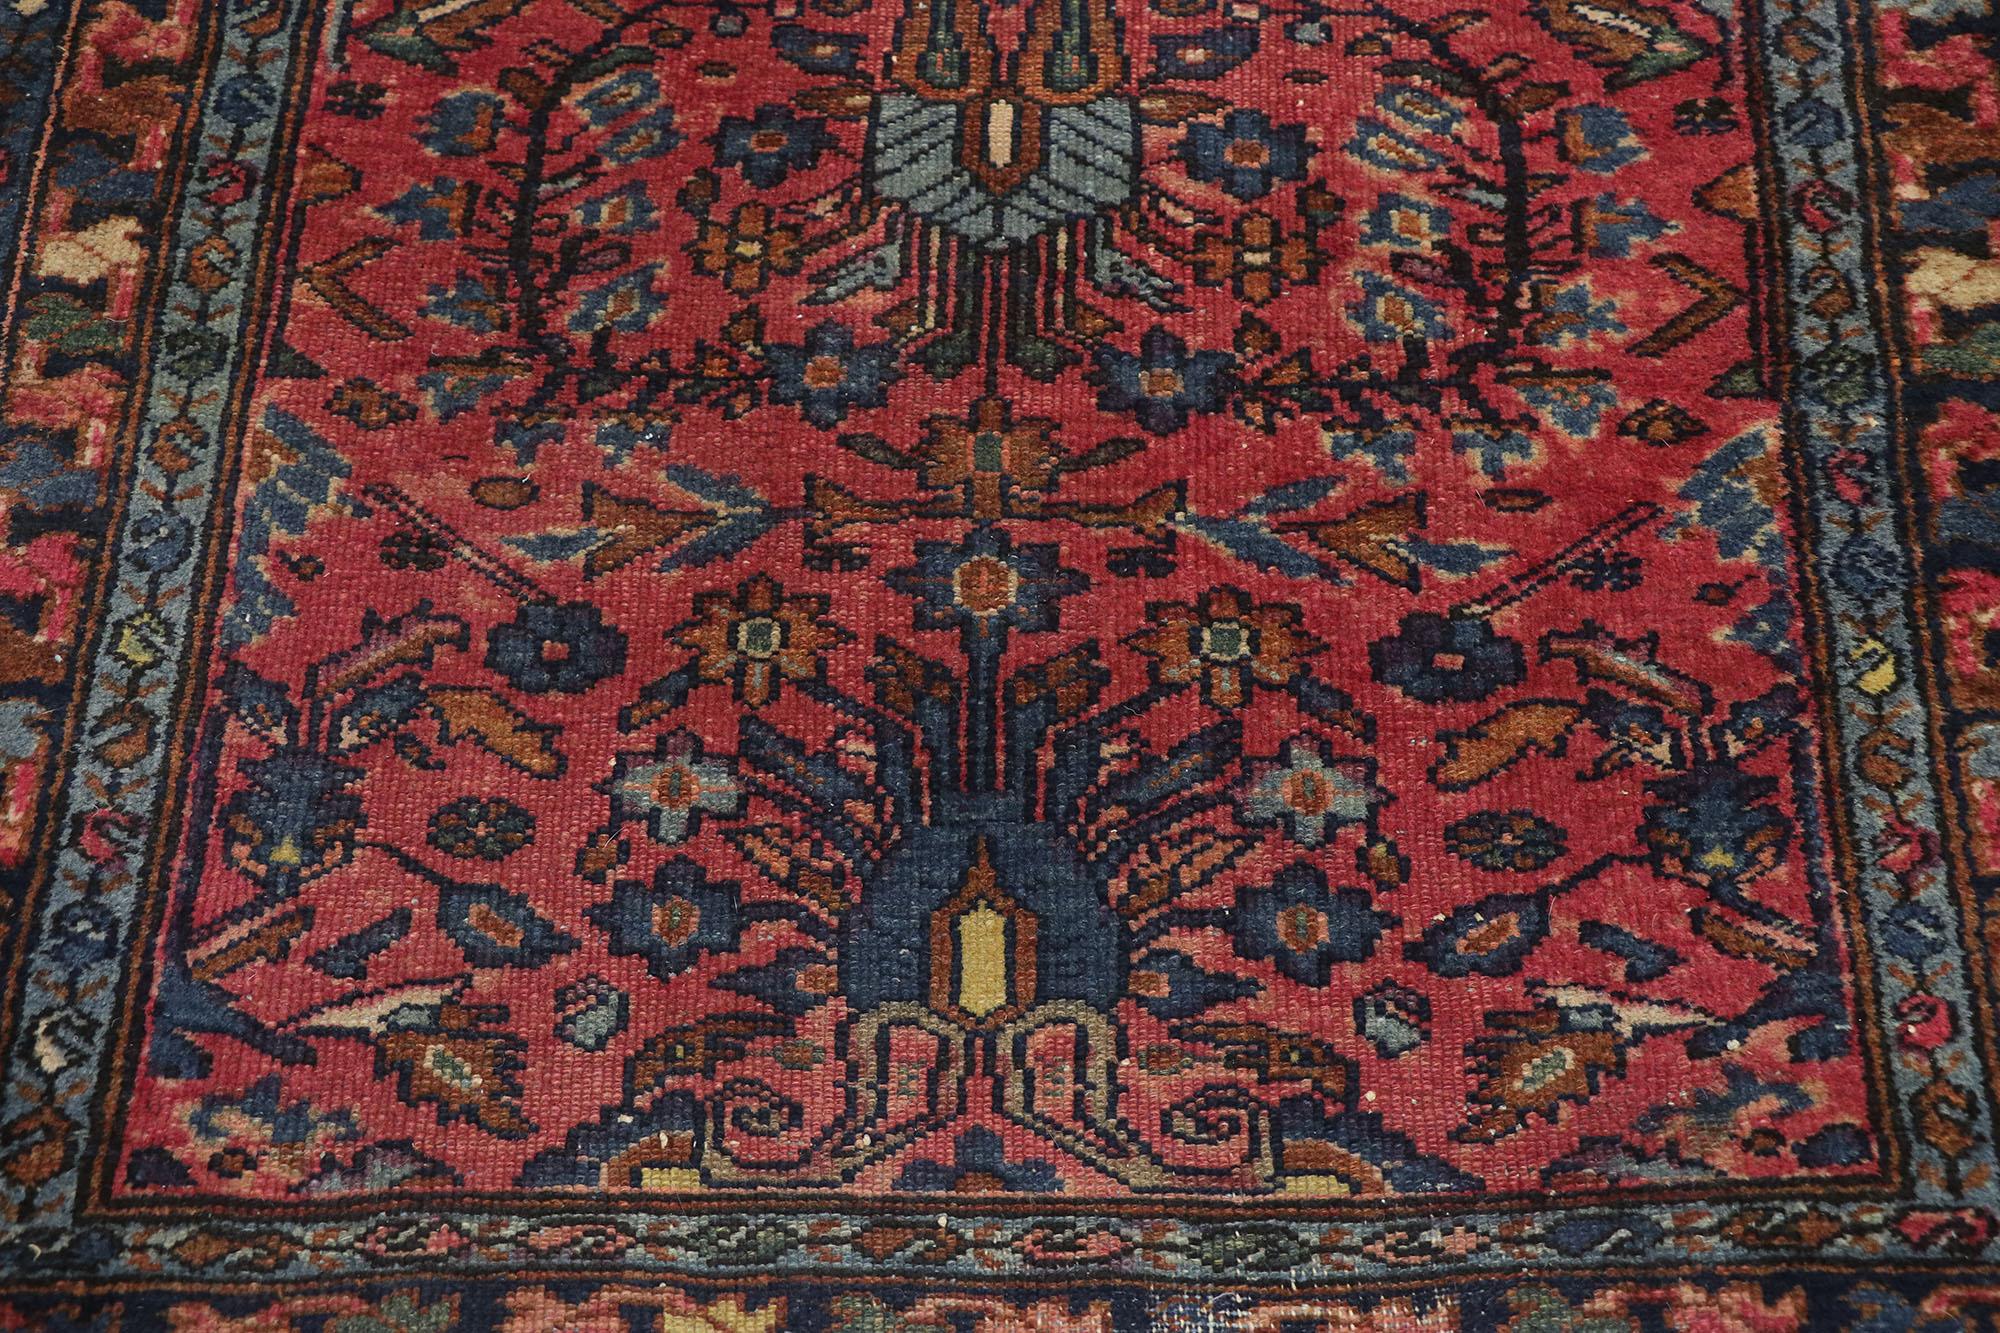 Hand-Knotted Distressed Antique Persian Hamadan Rug with Rustic English Manor Tudor Style